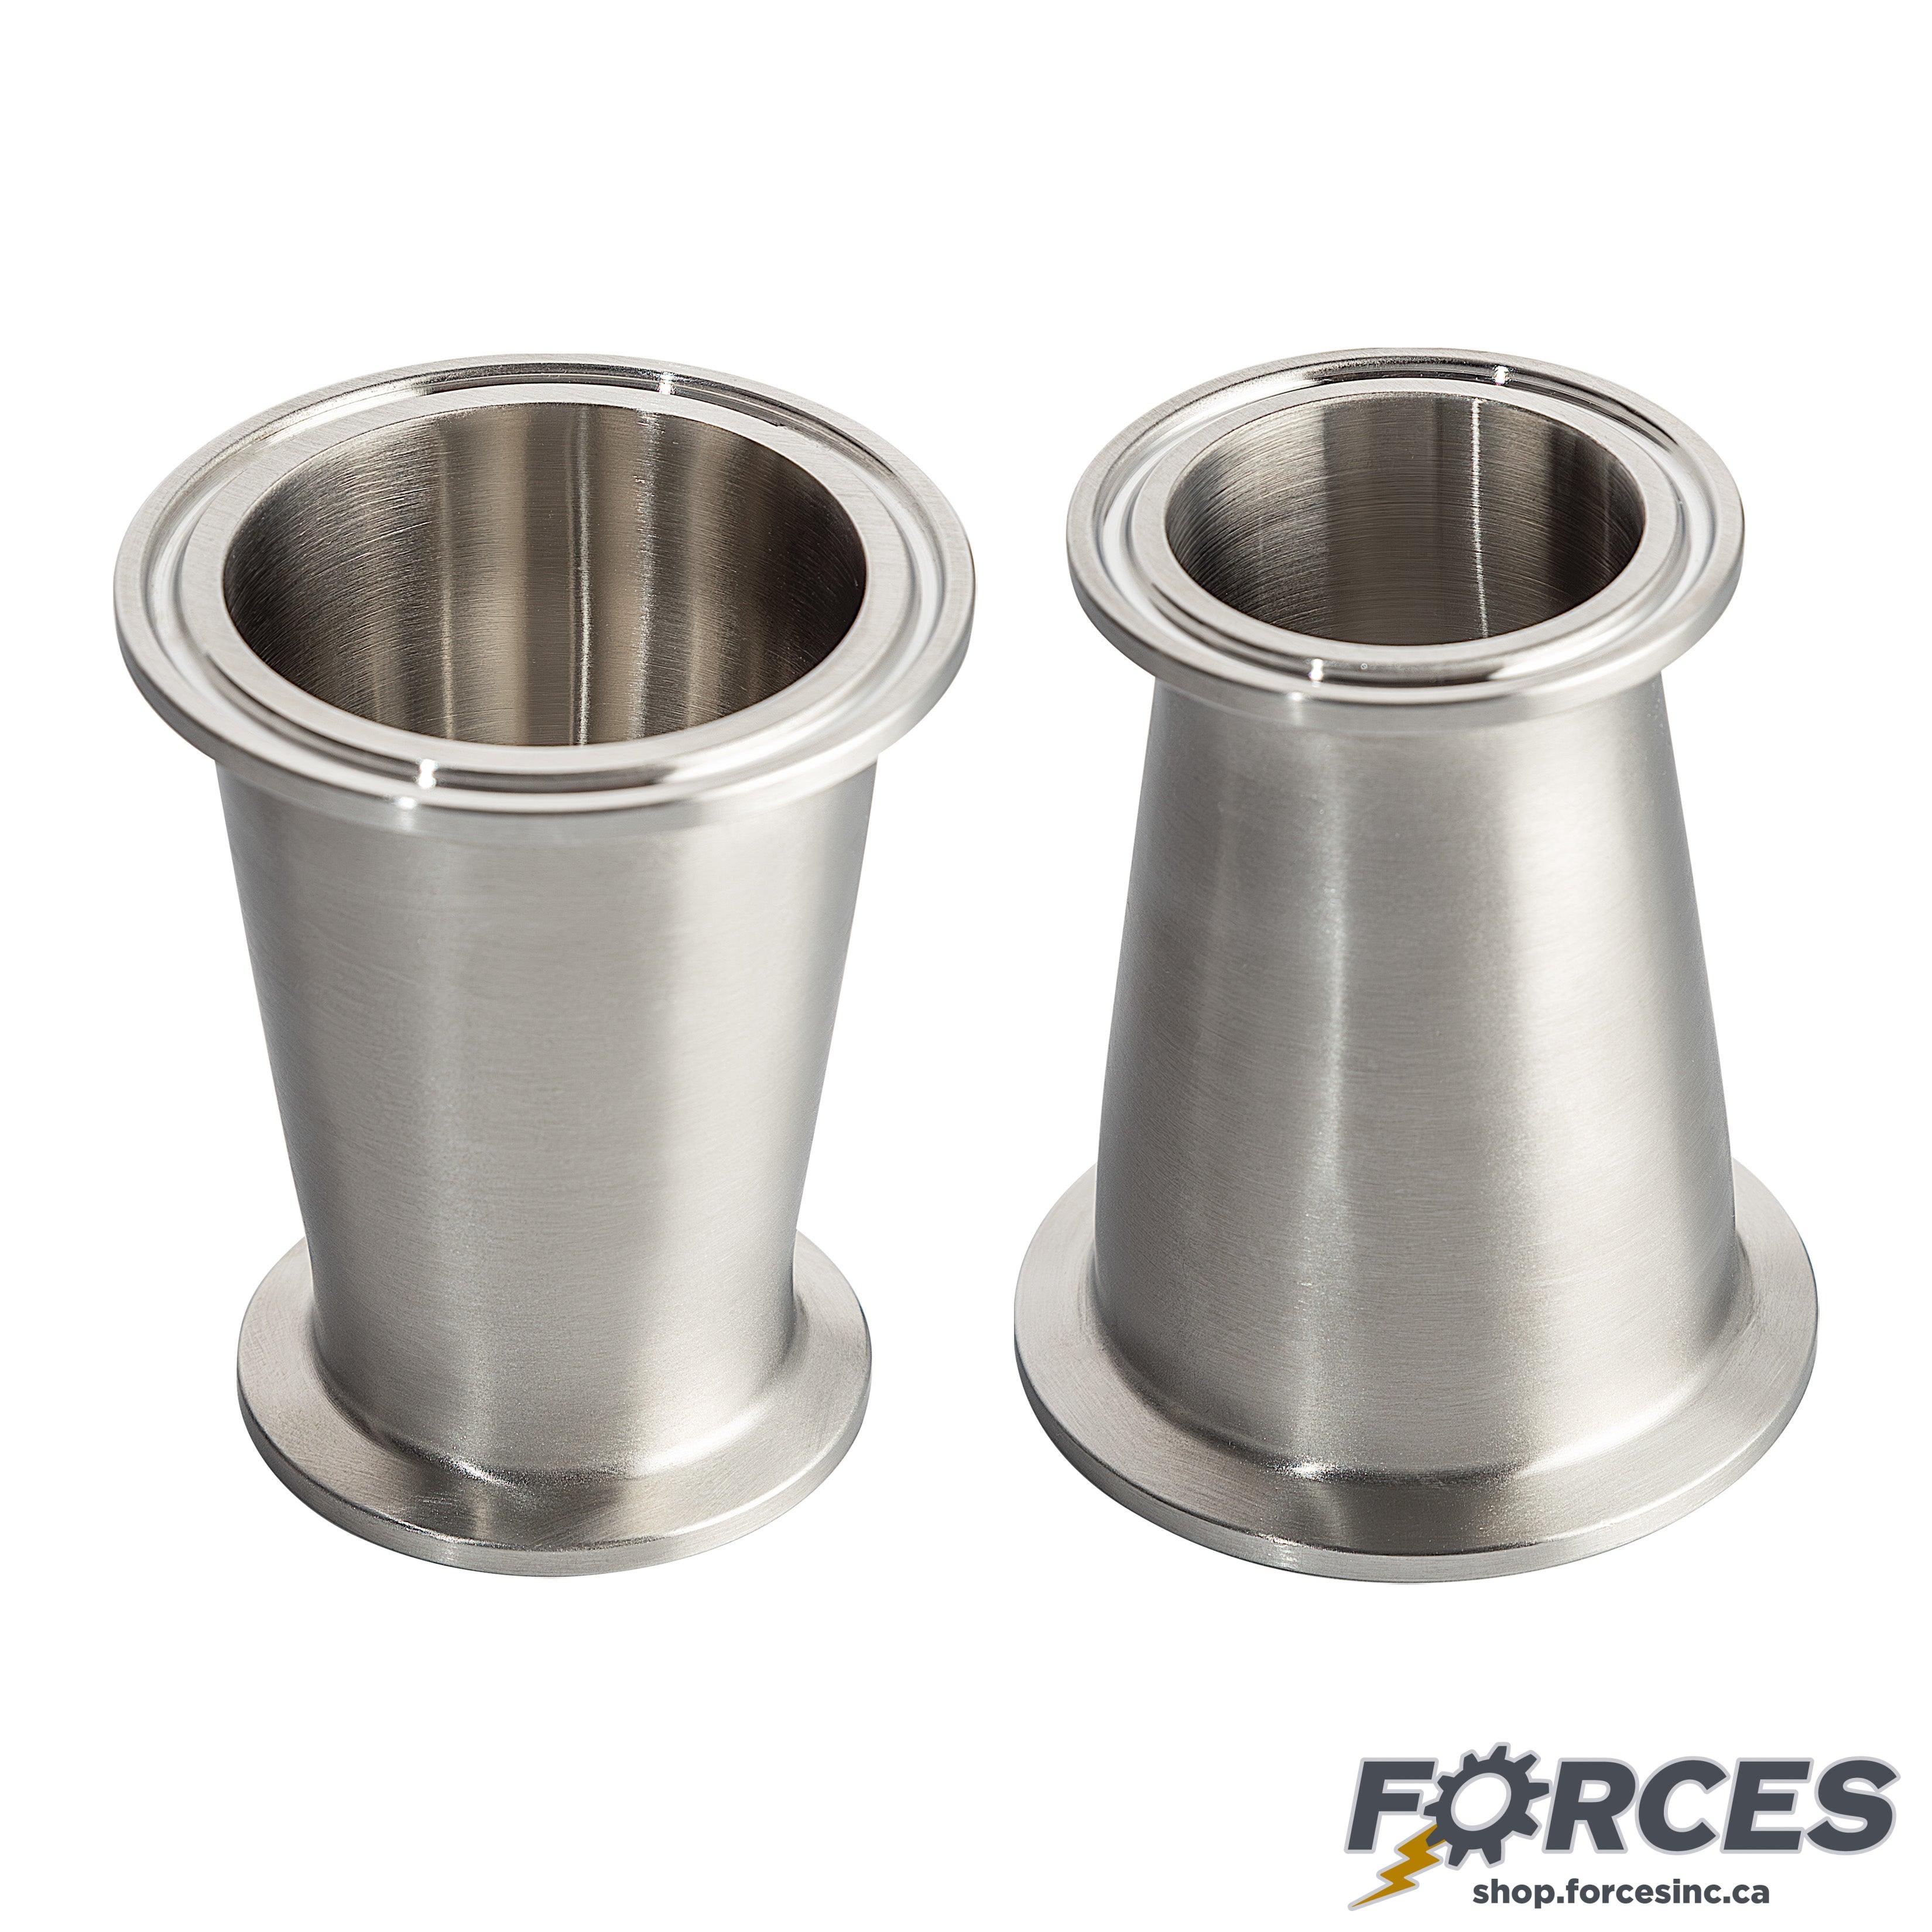 2" x 1-1/2" Tri-Clamp Concentric Reducer - Stainless Steel 304 - Forces Inc